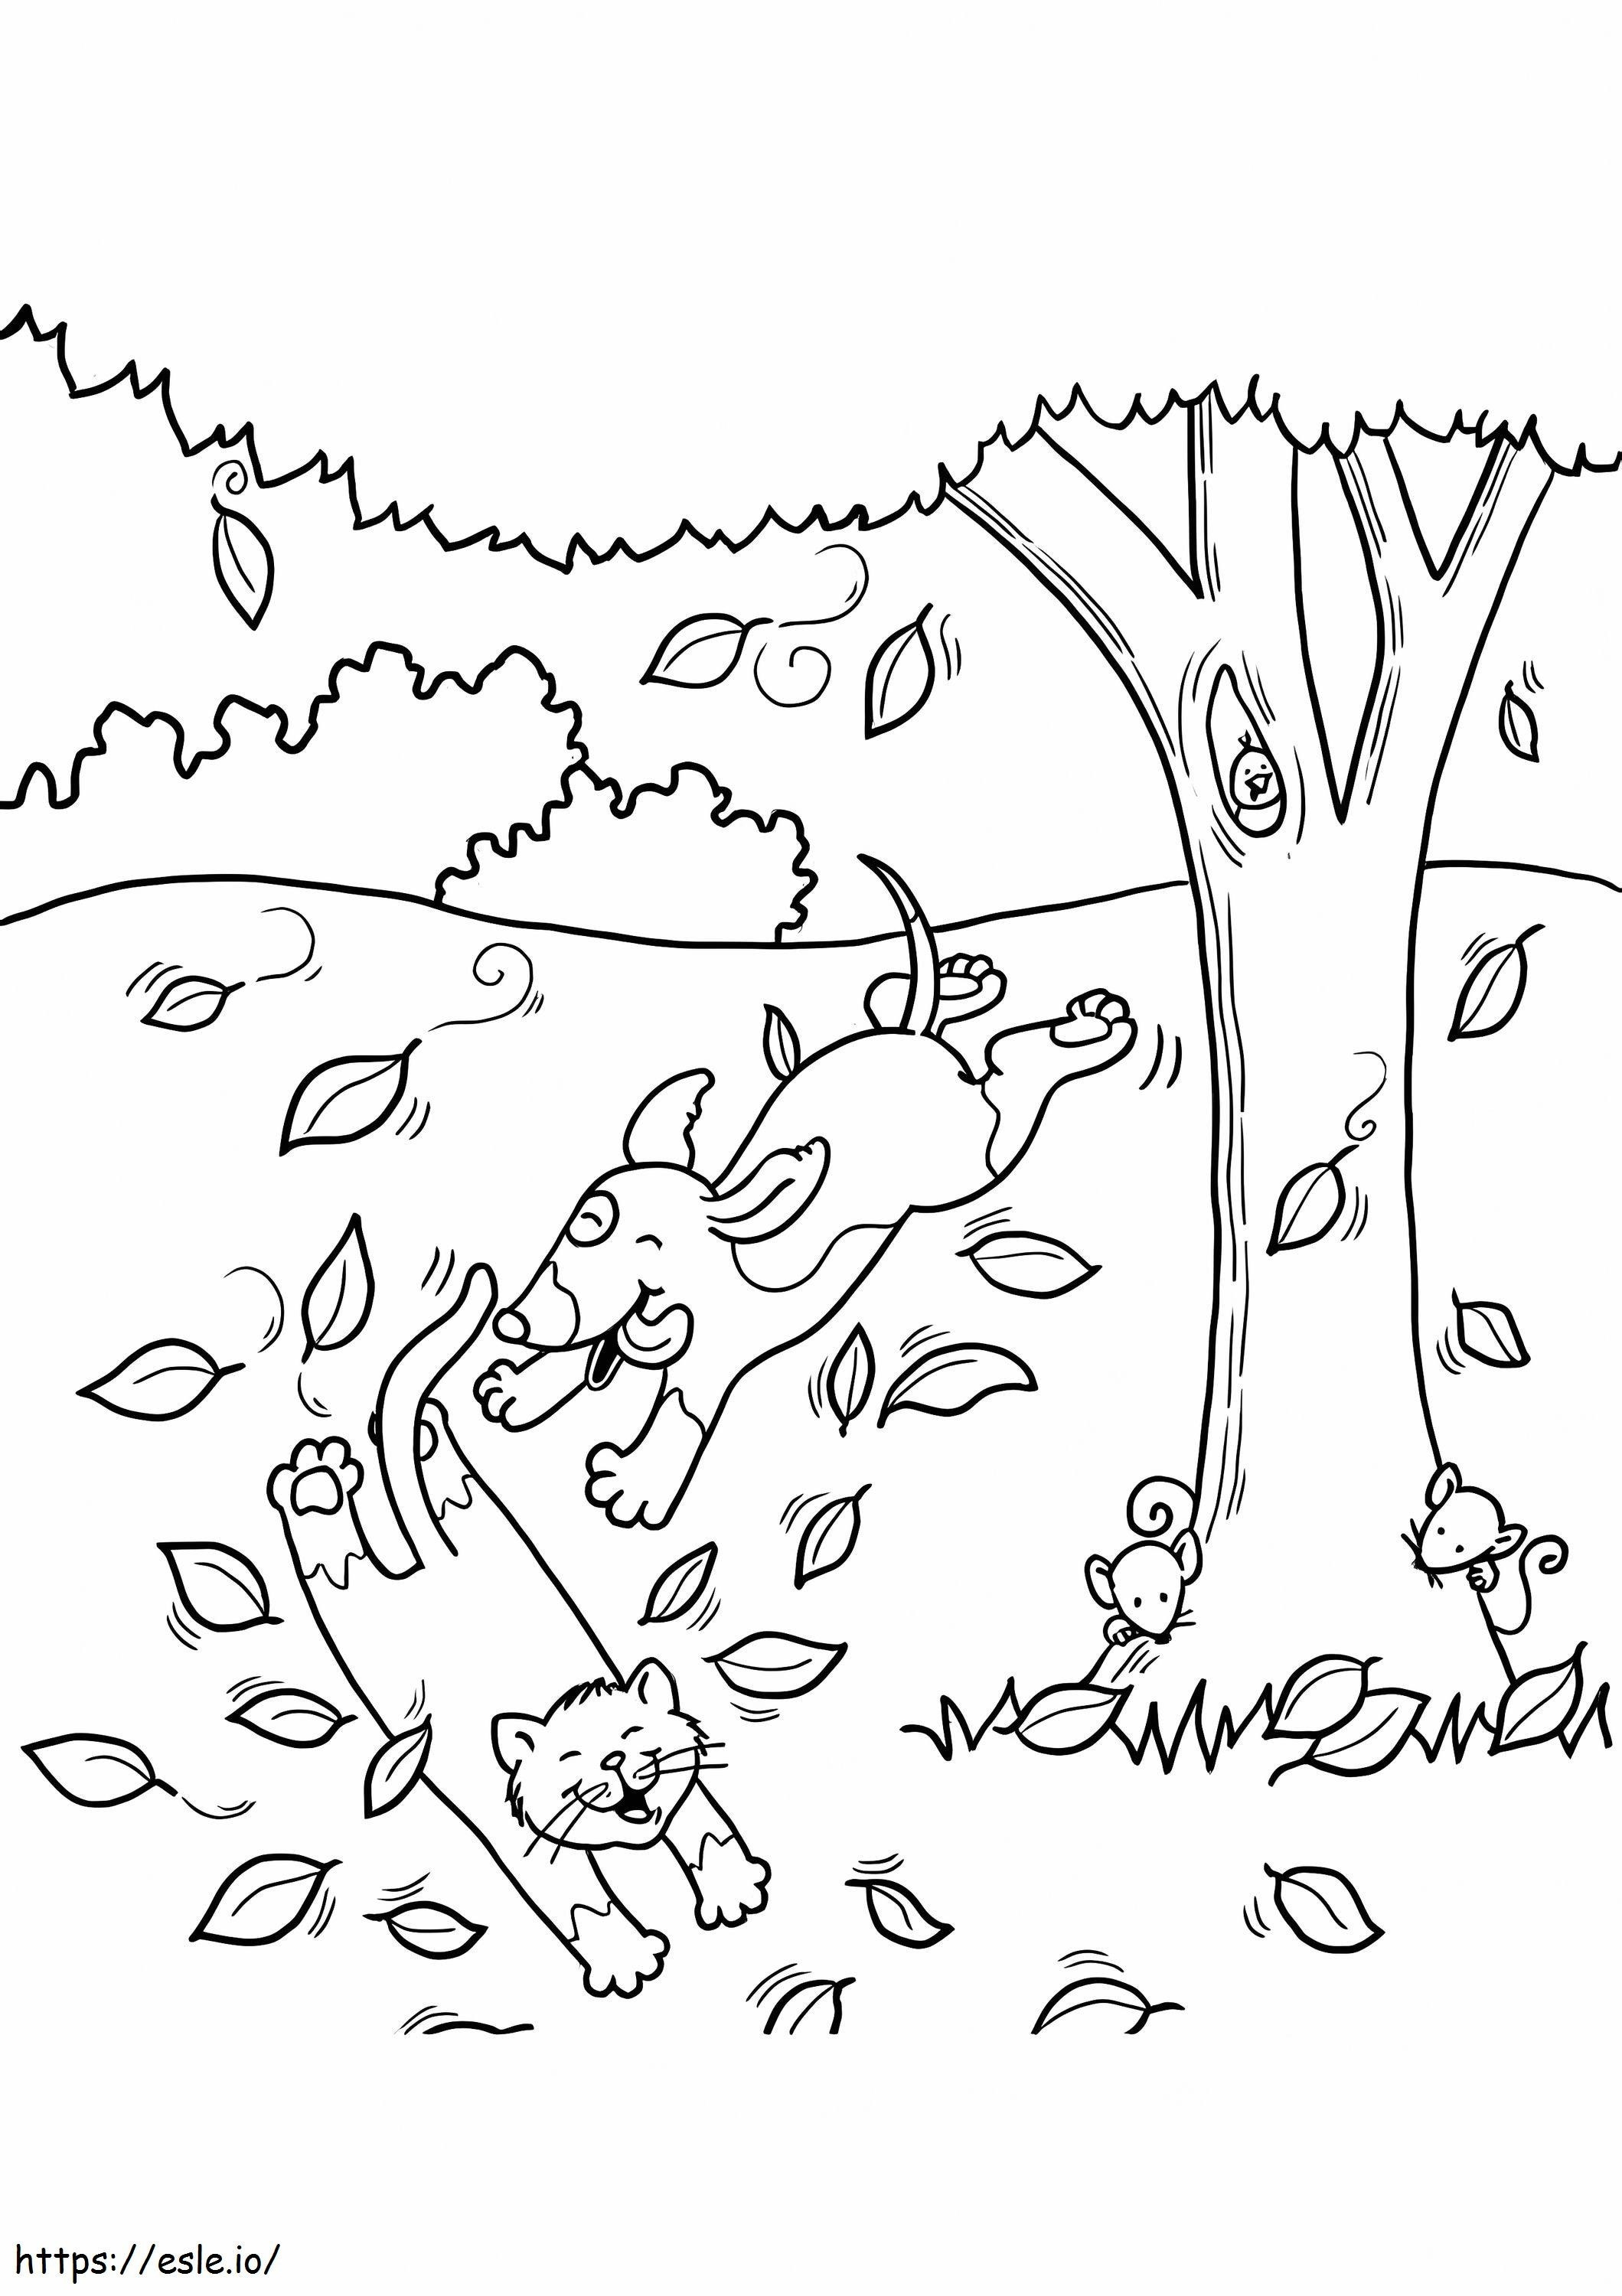 Funny Dog And Cat In Autumn coloring page